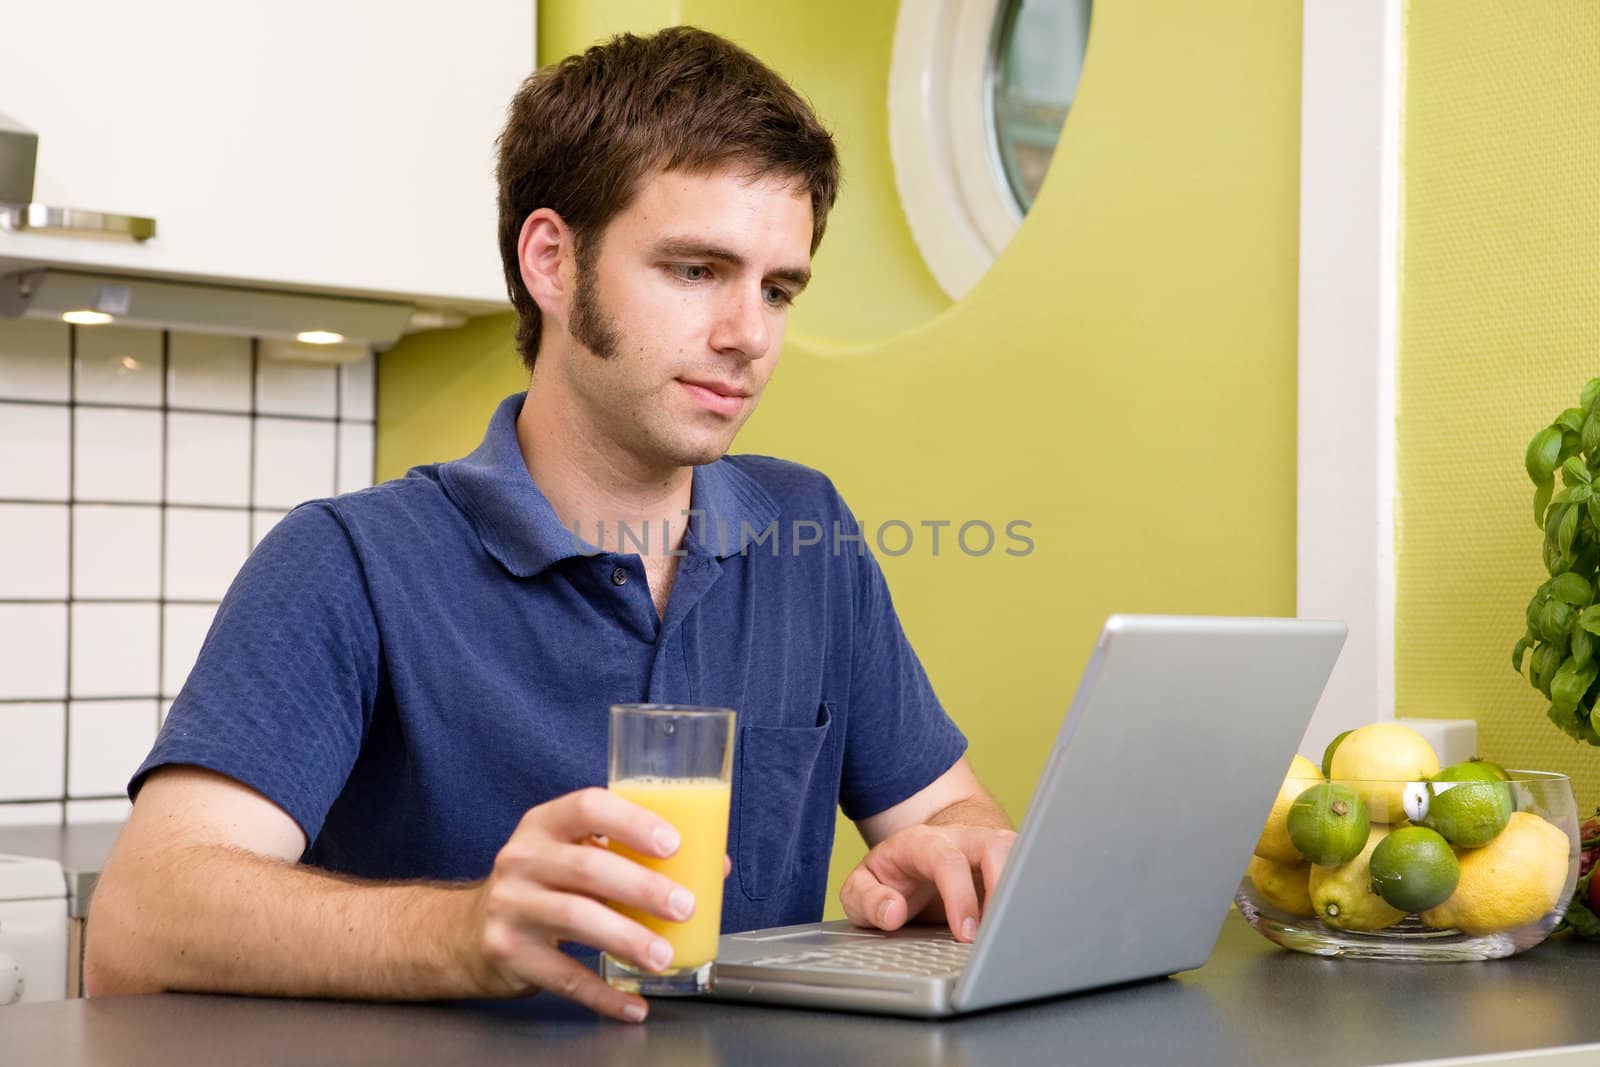 A young male works on the computer in the kicthen with a glass of orange juice